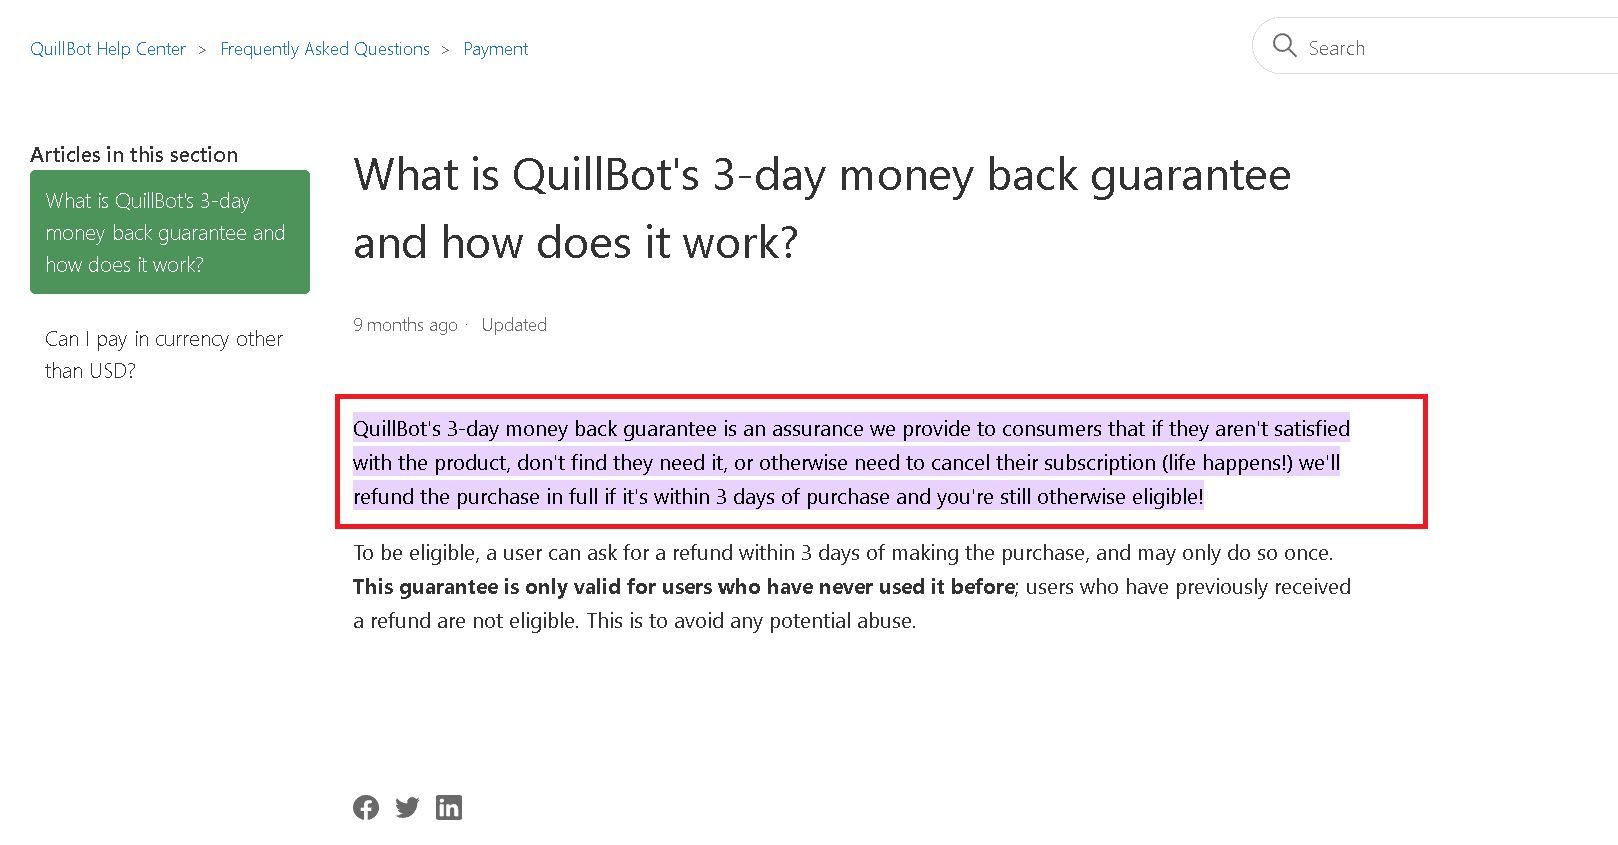 Quillbot refund guarantee official policy